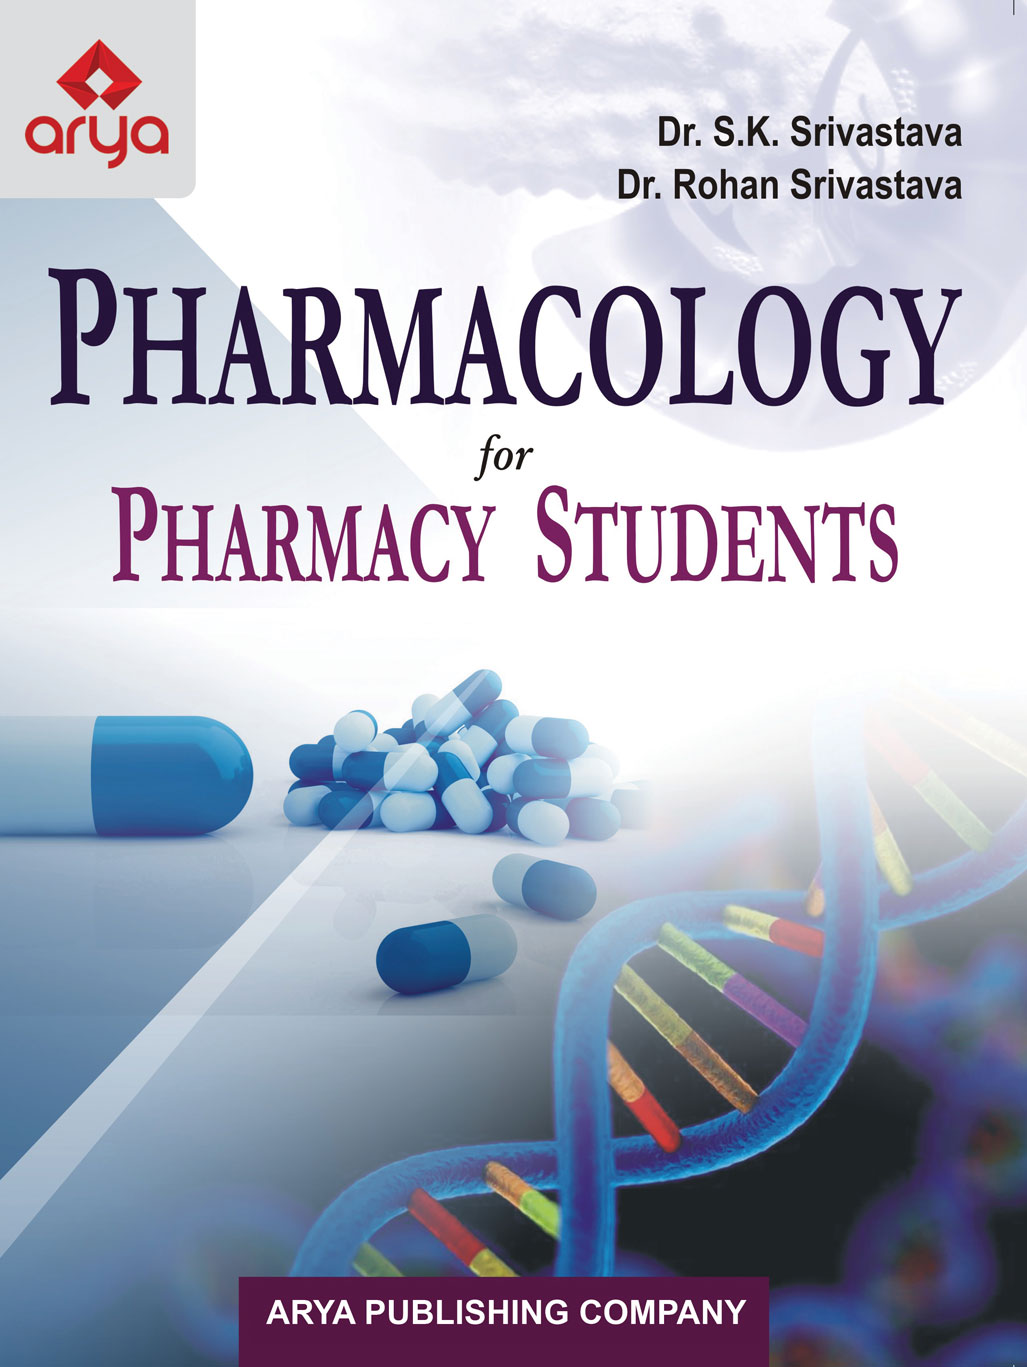 Pharmacology for Pharmacy Students